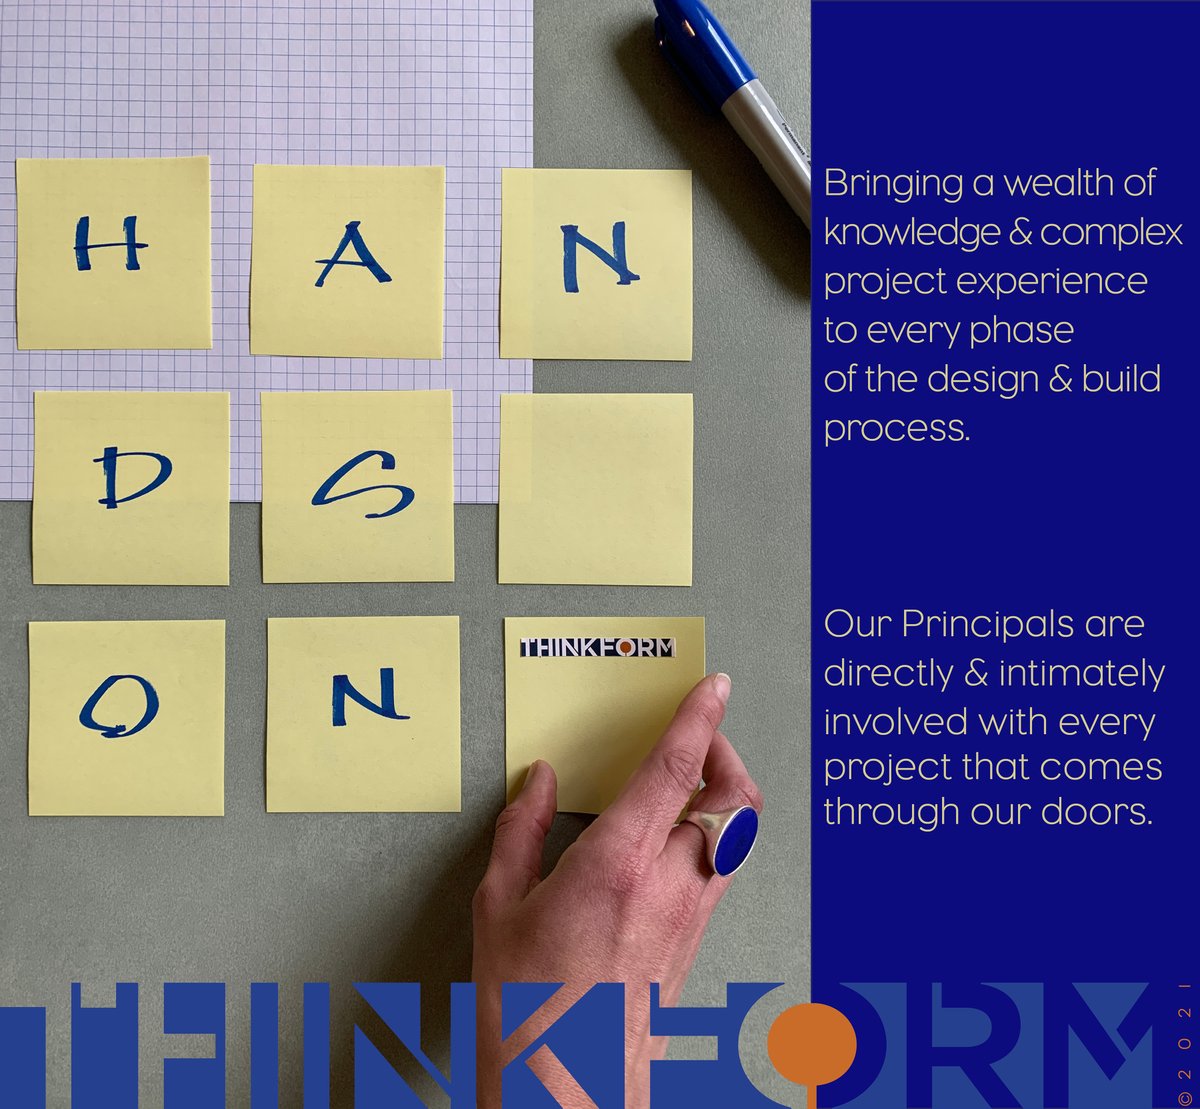 THINKhands-on. ThinkFormArchitects.com 

#architecture #handson #businessmindset #brainstorm #involved #collaboration #teamwork #forming #clientappreciation #vision #mission #officeculture  #designinspiration #designphilosophy #inspiration #hopewell #smallbusiness #newjersey